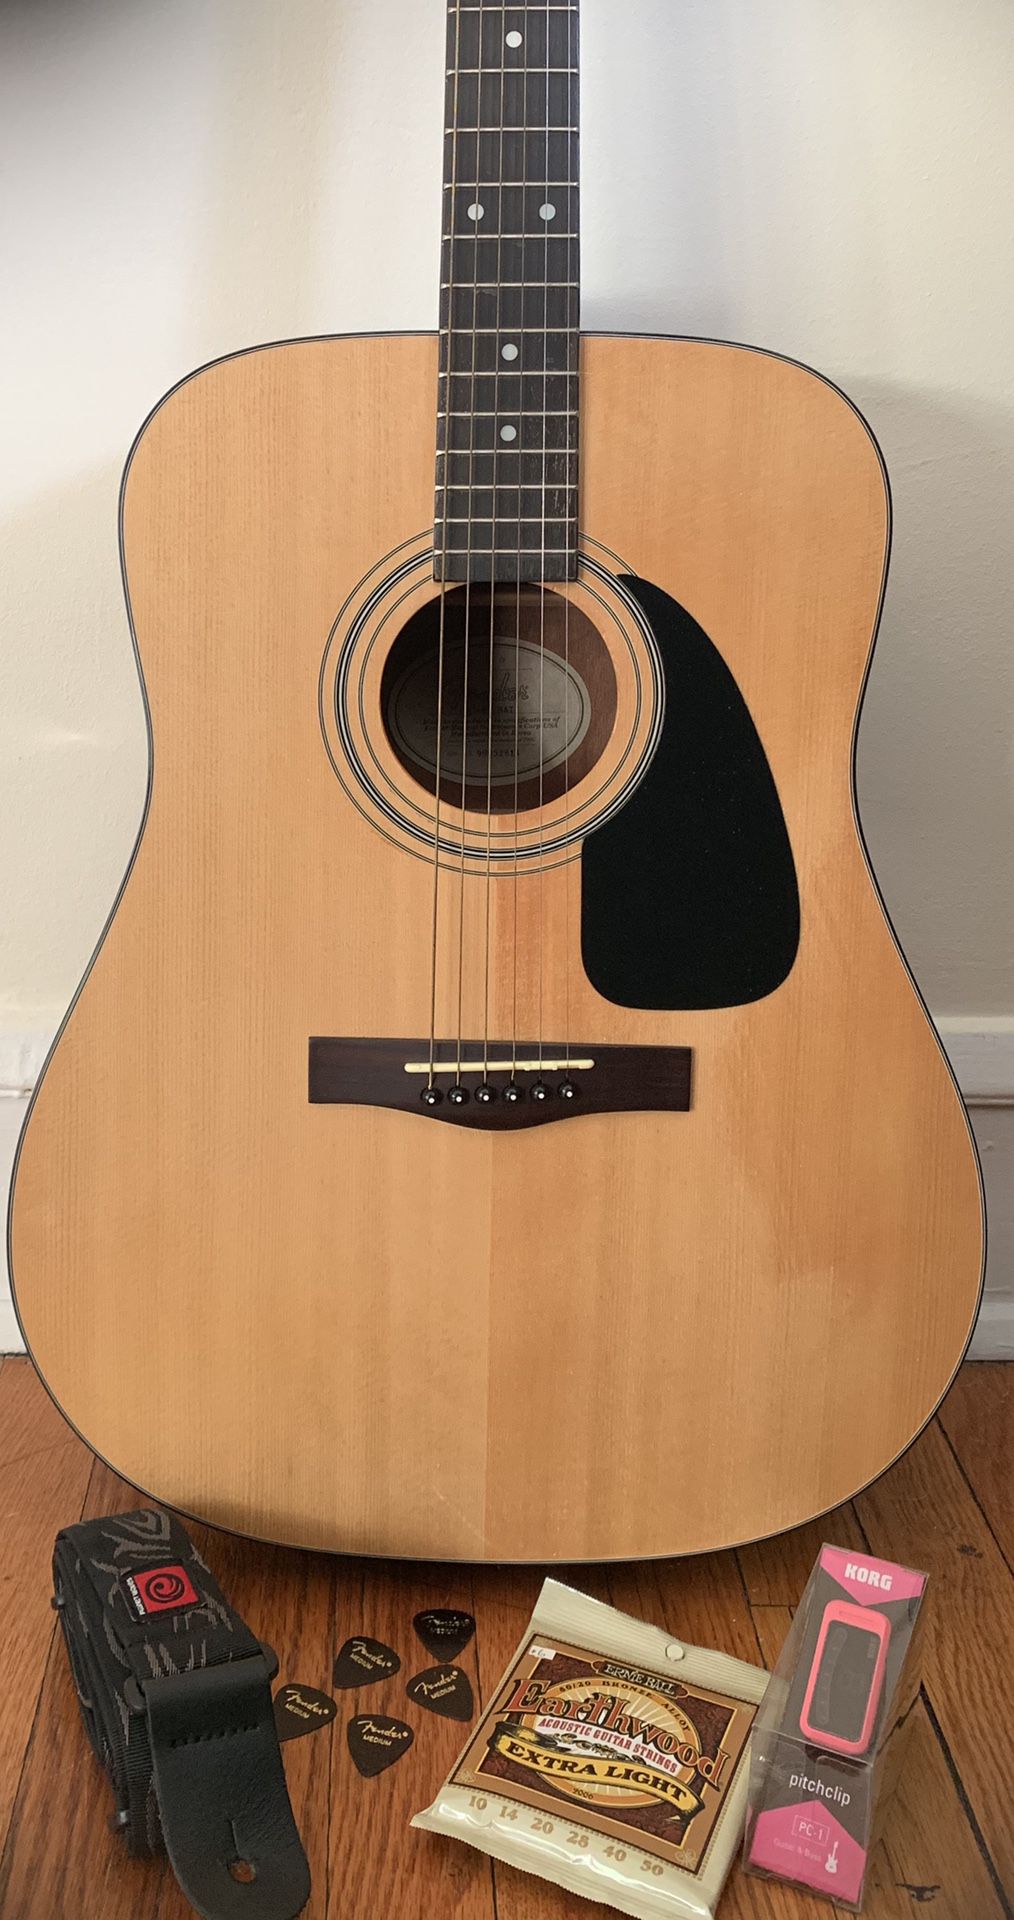 Fender DG-8 acoustic dreadnought guitar with starter accessories!